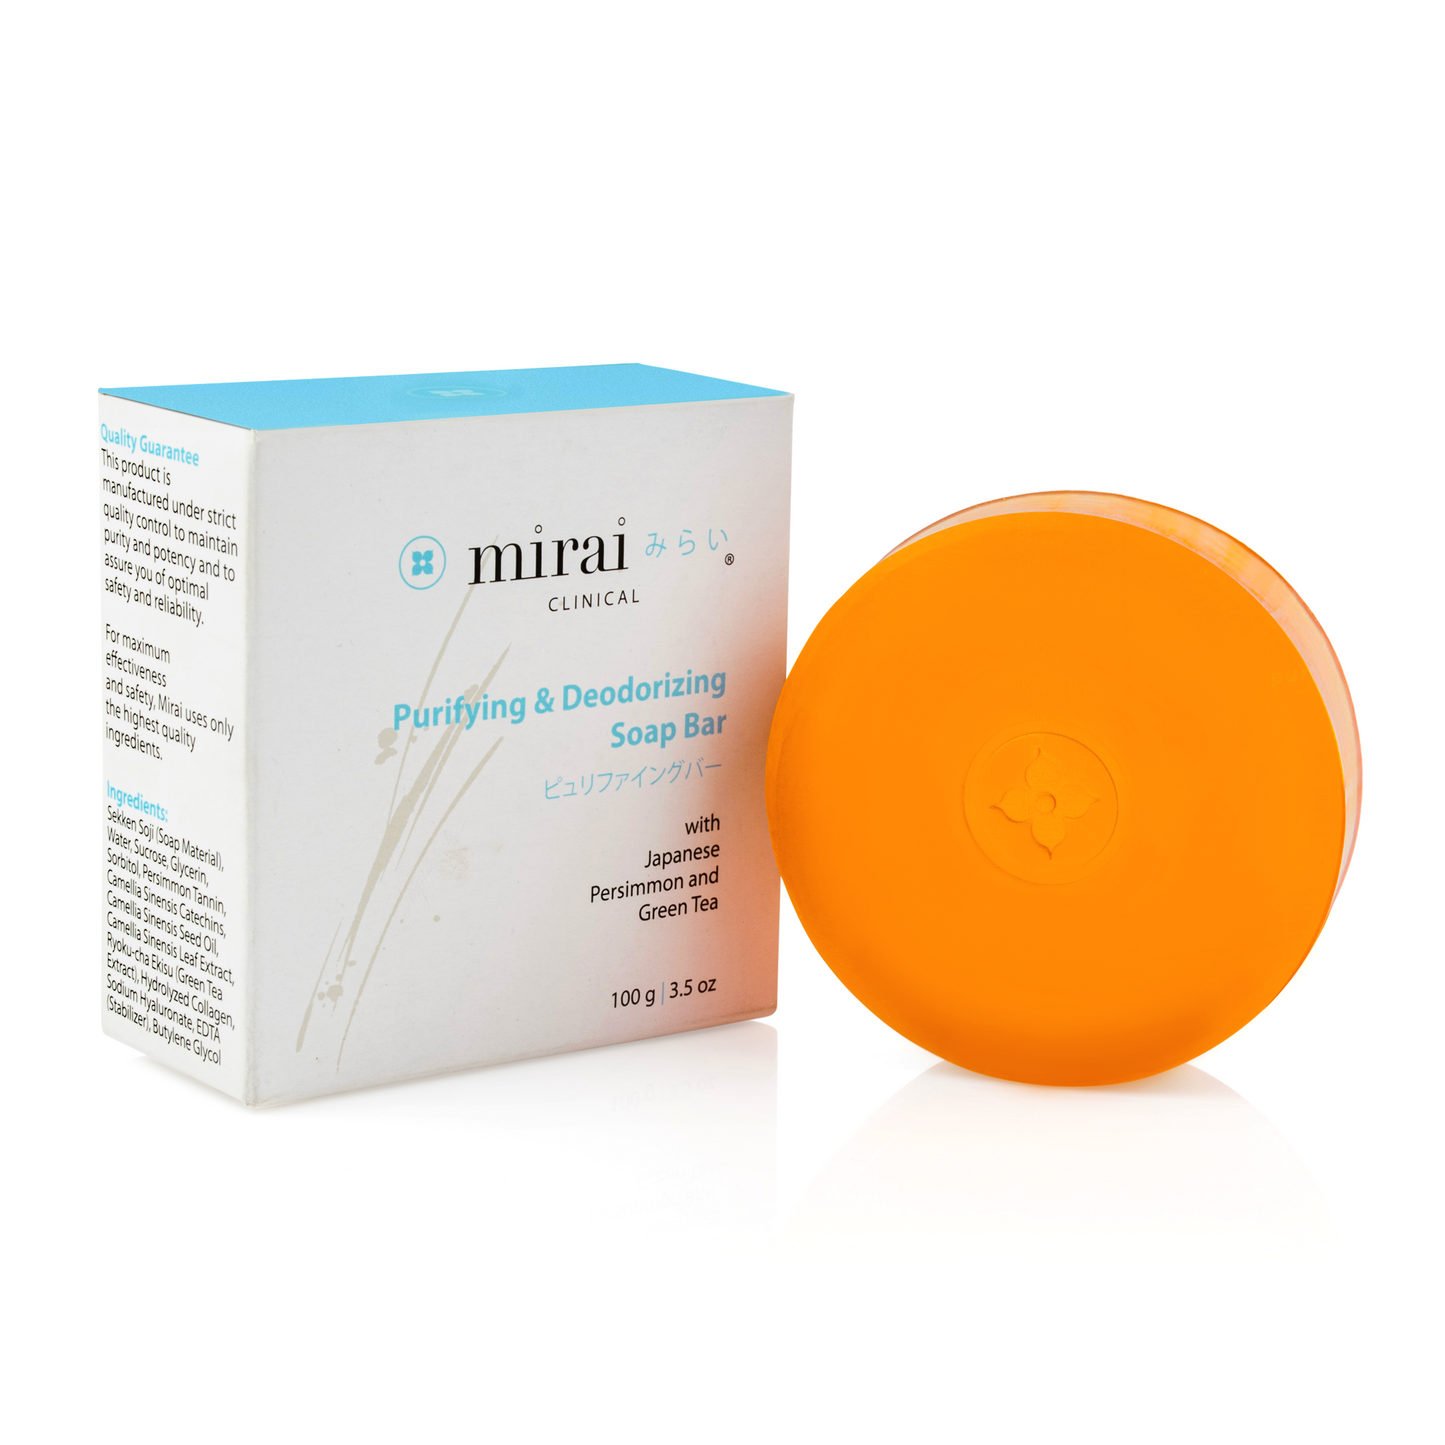 Mirai Clinical's Deodorizing Soap Bar, richly formulated with Japanese Persimmon extract, designed to target and neutralize nonenal body odor, delivering a rejuvenating cleanse with every use.